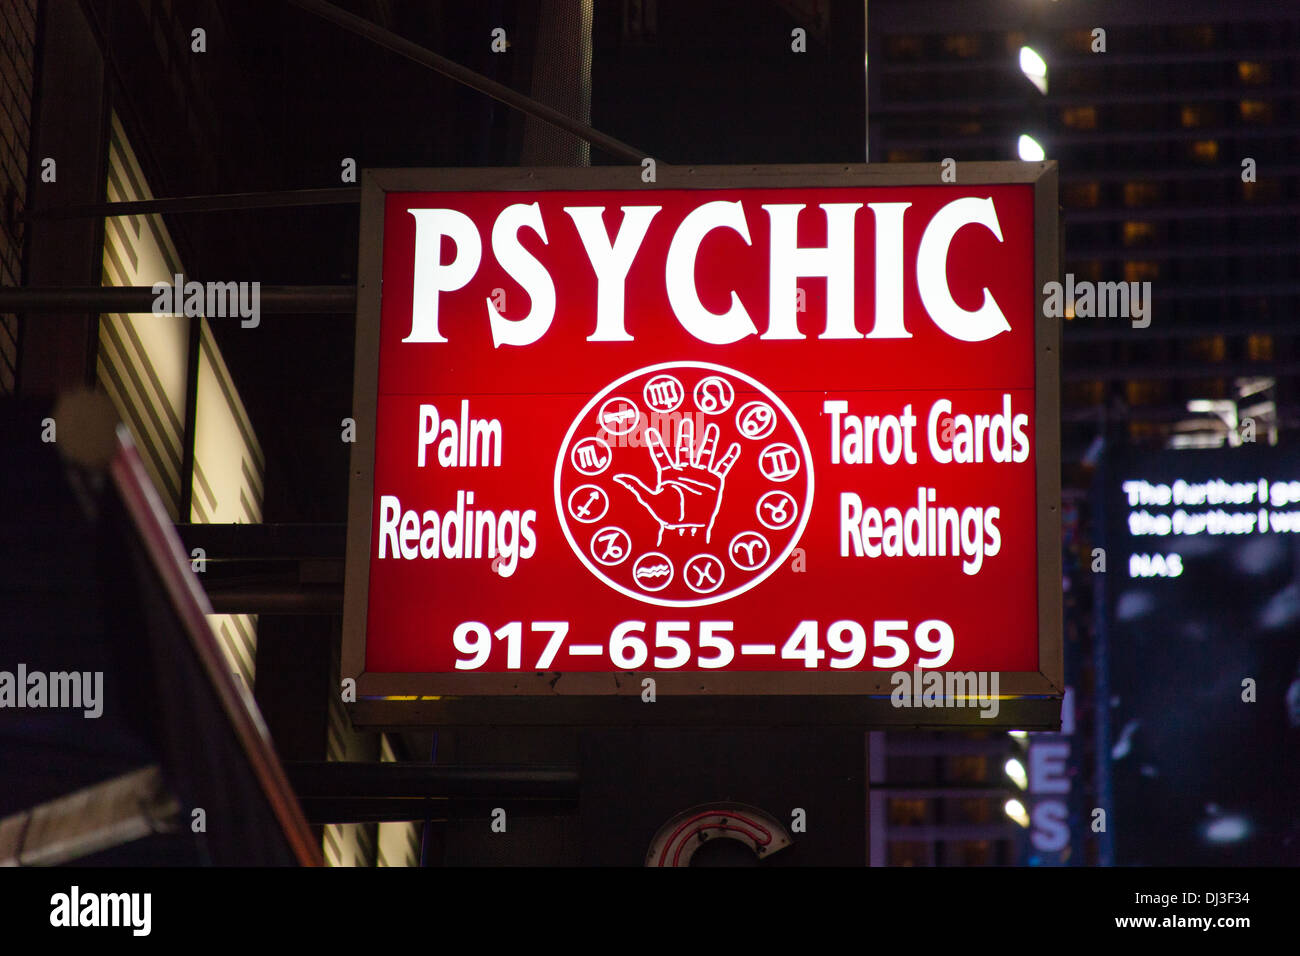 Psychic sign, Times Square, New York City, United States of America. Stock Photo